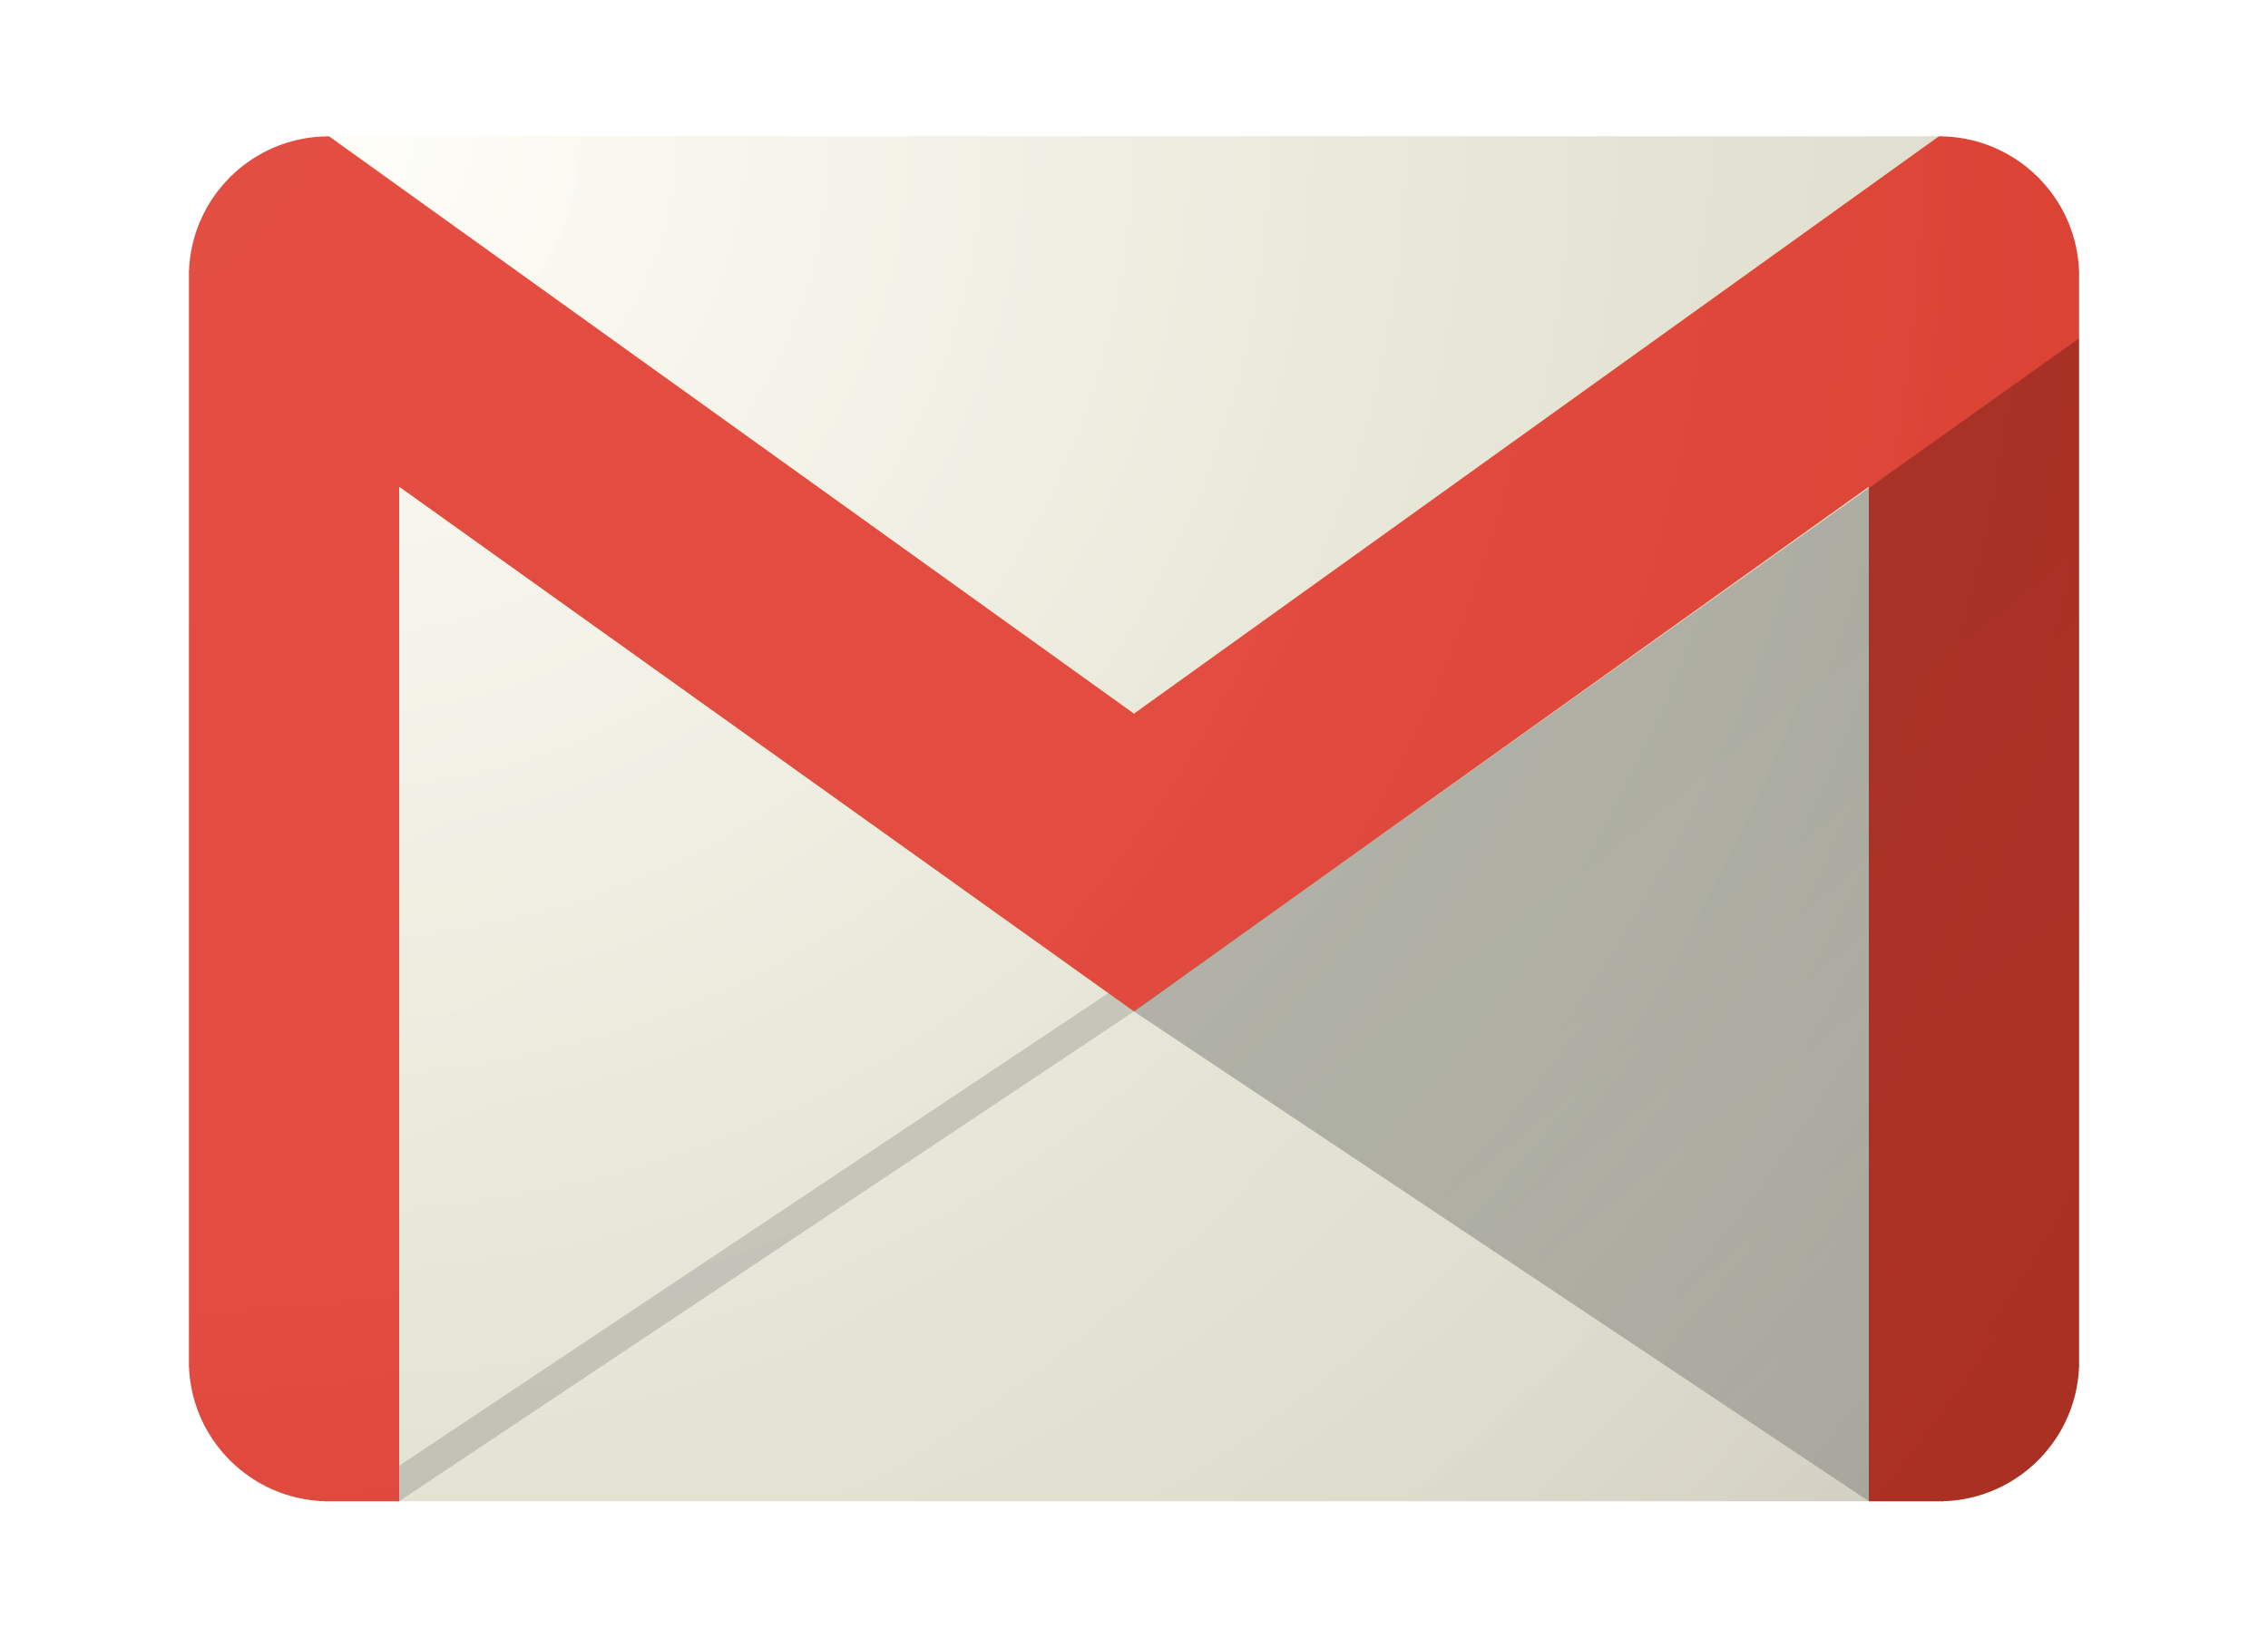 email clipart gmail